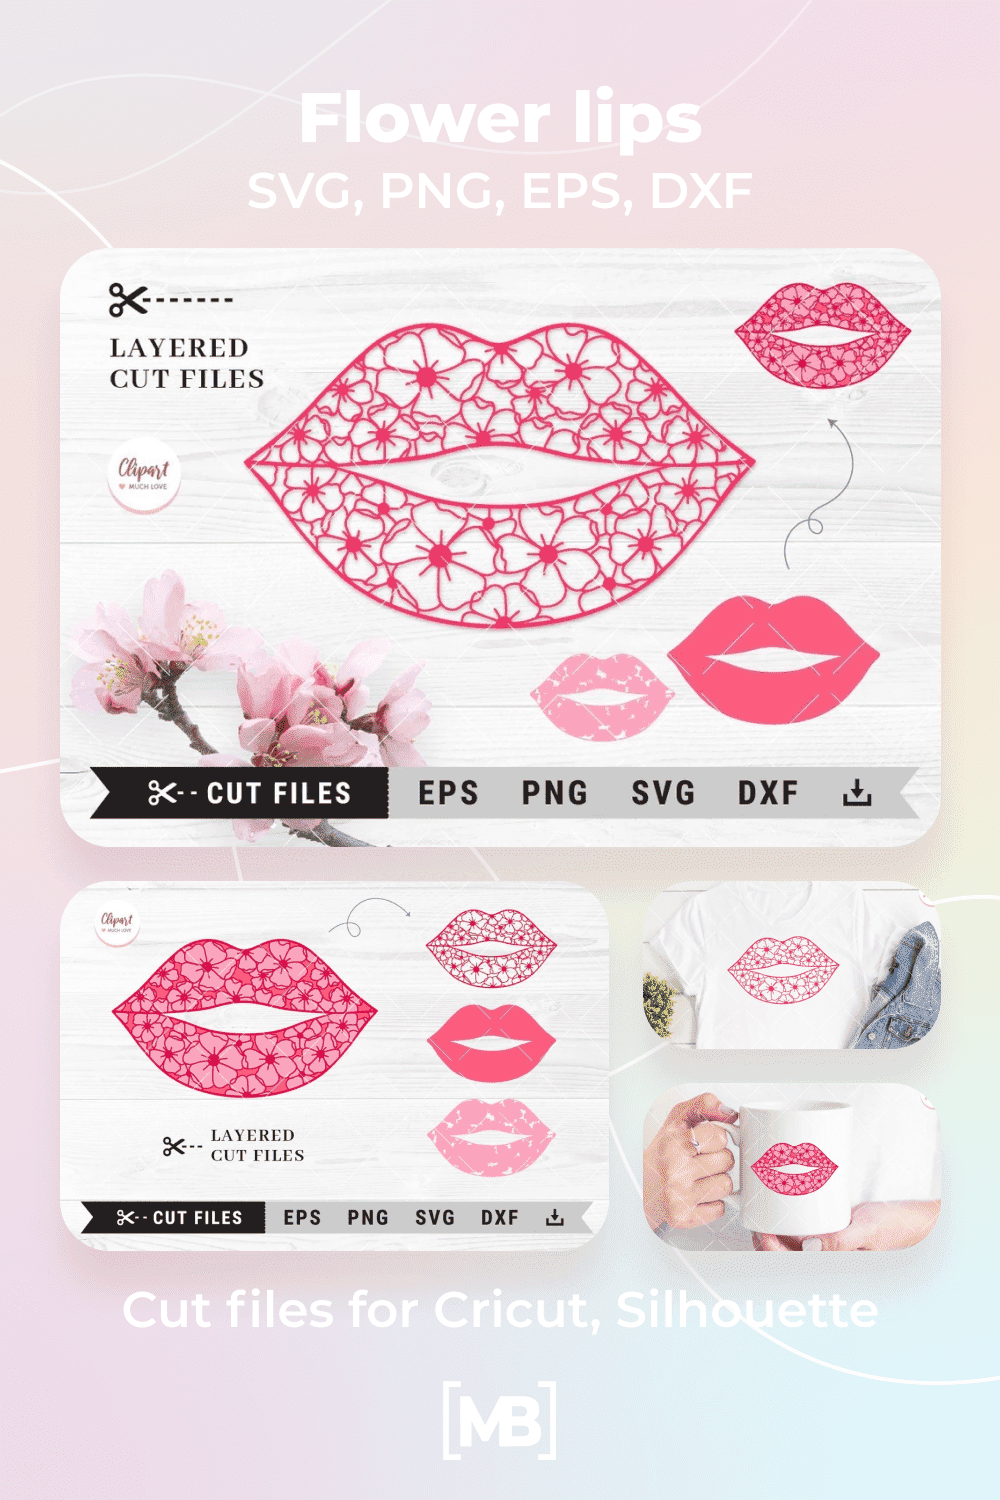 Flower lips SVG, PNG, EPS, DXF cut files for Cricut, Silhouette.